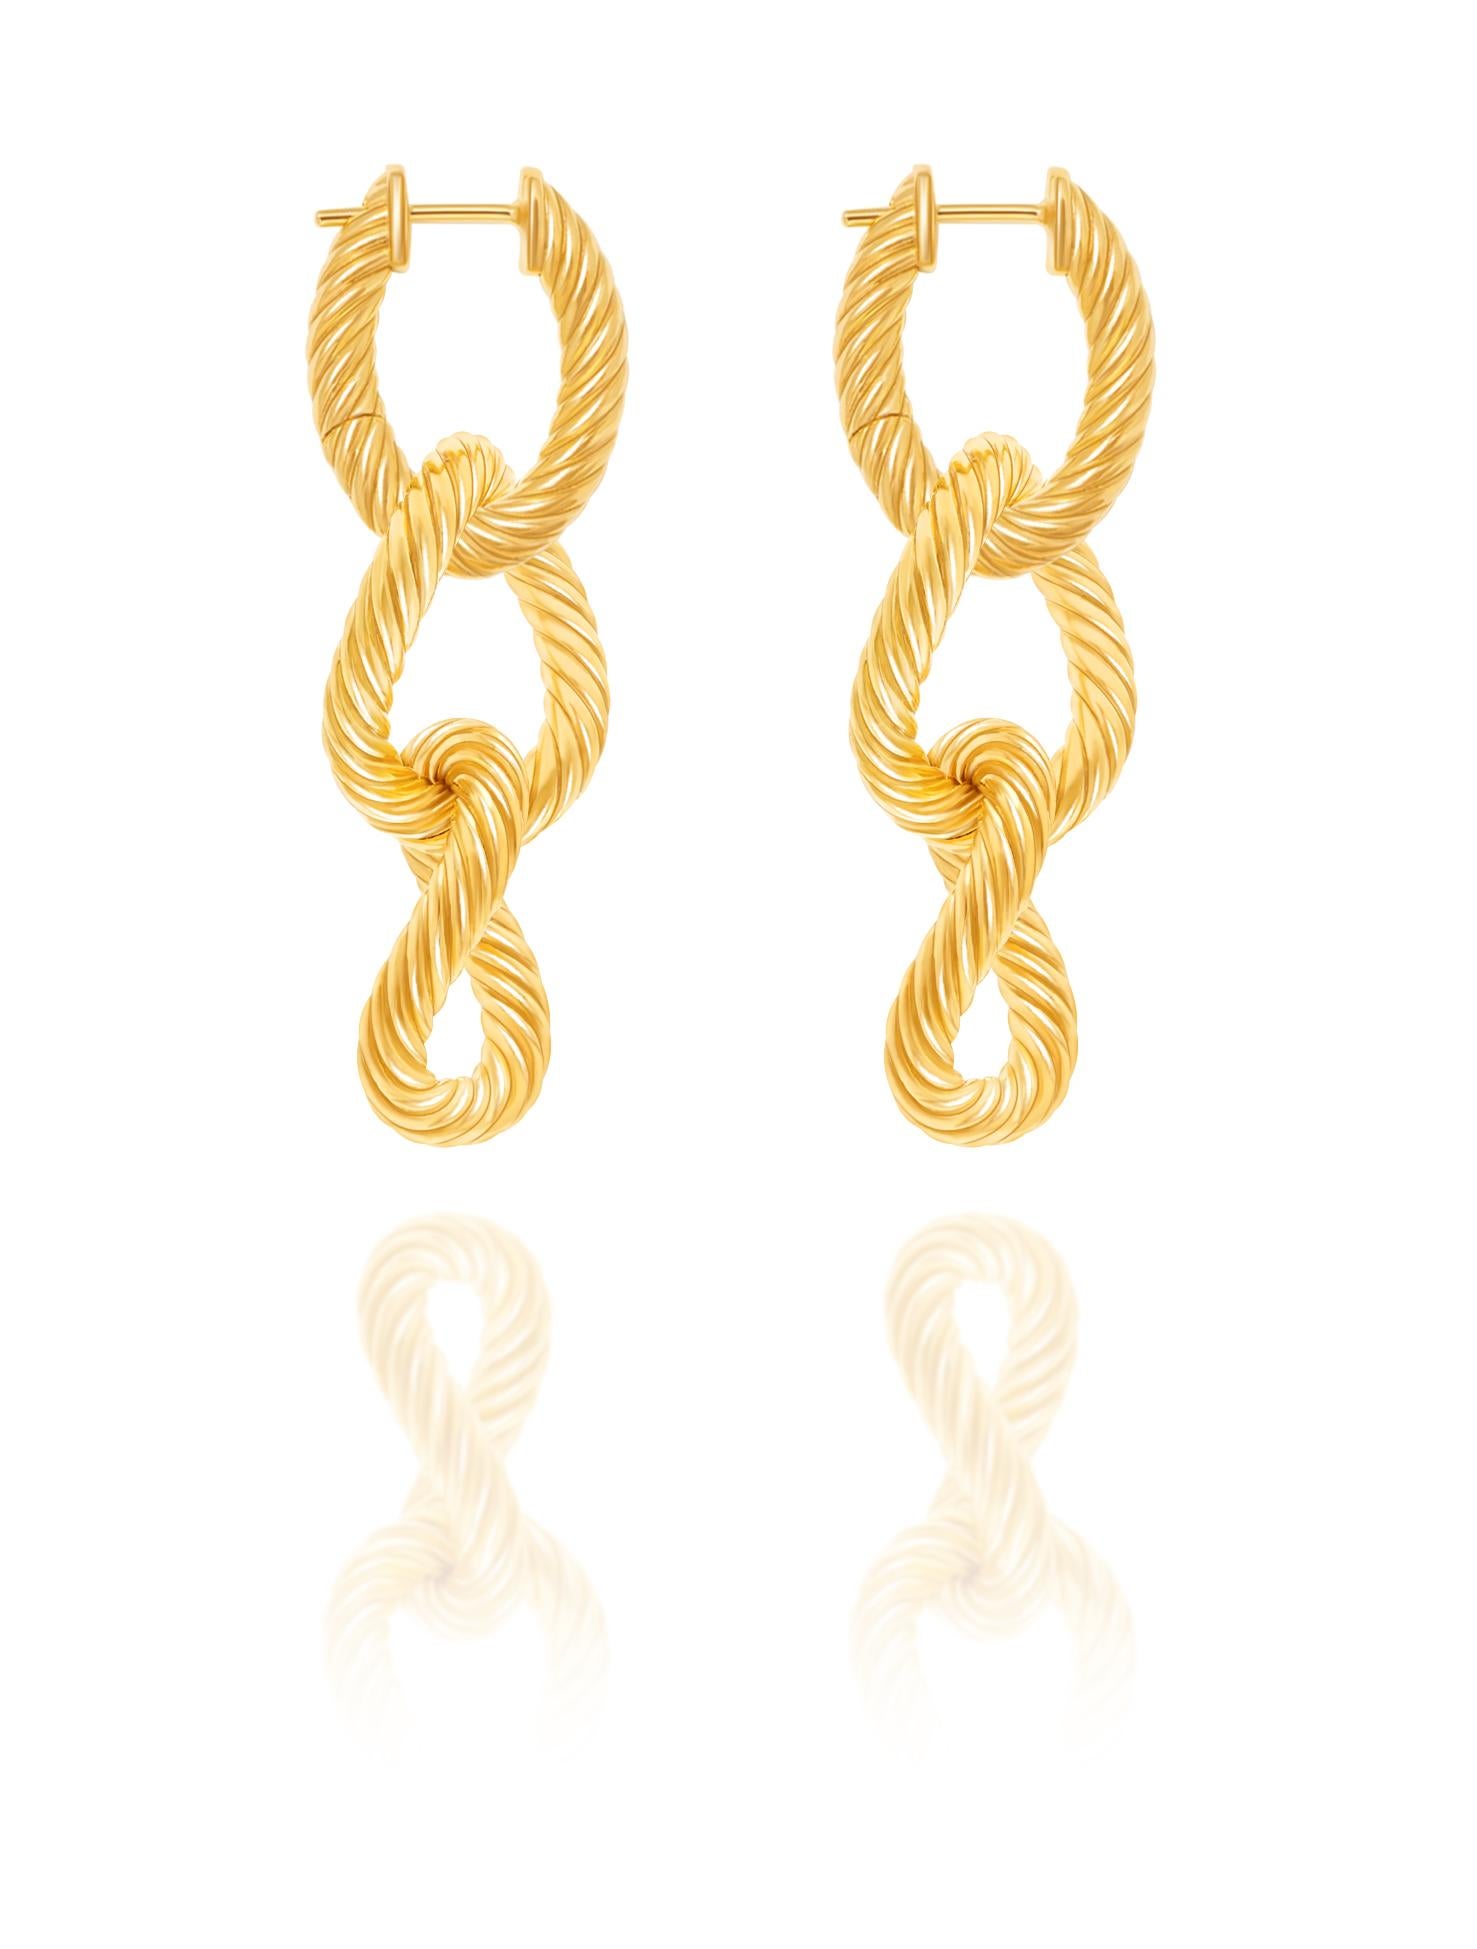 The Willemstad Earrings - A Love Affair Collection

See the world in a new light and be ready for any occasion in these statement earrings. The matching chain link design beautifully compliments its matching necklace, The Willemstad. These unique